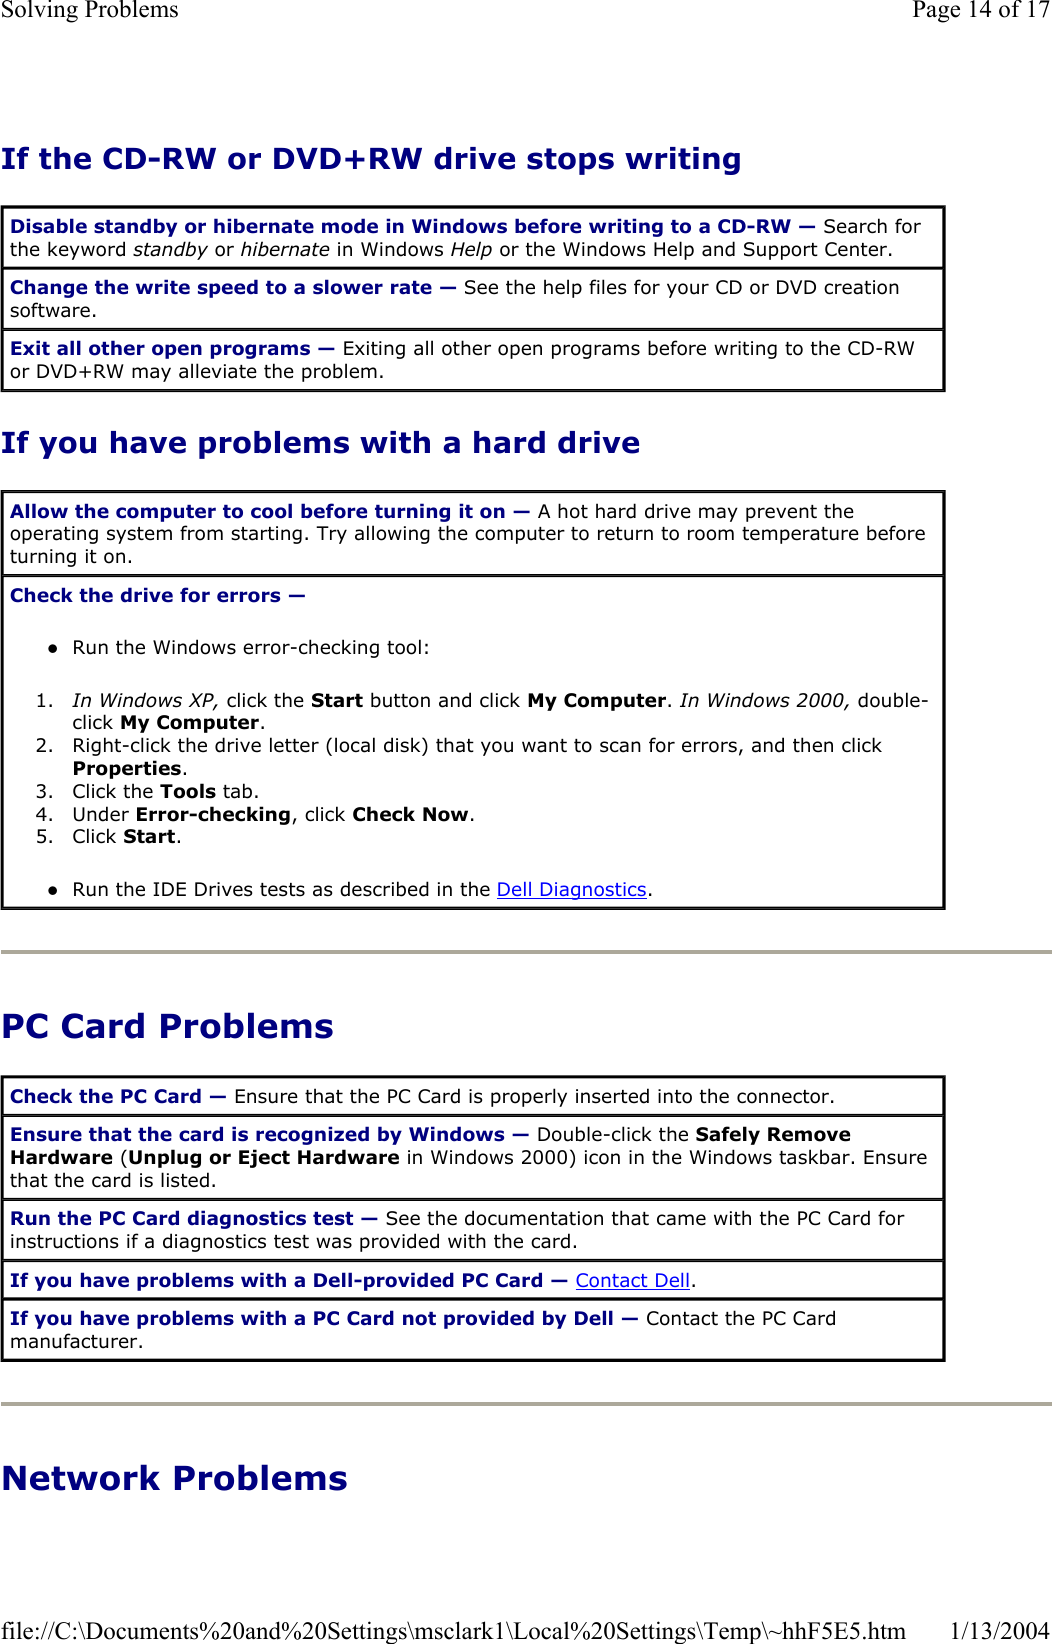 If the CD-RW or DVD+RW drive stops writing If you have problems with a hard drive PC Card Problems Network Problems Disable standby or hibernate mode in Windows before writing to a CD-RW — Search for the keyword standby or hibernate in Windows Help or the Windows Help and Support Center. Change the write speed to a slower rate — See the help files for your CD or DVD creation software. Exit all other open programs — Exiting all other open programs before writing to the CD-RW or DVD+RW may alleviate the problem. Allow the computer to cool before turning it on — A hot hard drive may prevent the operating system from starting. Try allowing the computer to return to room temperature before turning it on. Check the drive for errors —zRun the Windows error-checking tool:  1. In Windows XP, click the Start button and click My Computer.In Windows 2000, double-click My Computer.2. Right-click the drive letter (local disk) that you want to scan for errors, and then click Properties.3. Click the Tools tab.  4. Under Error-checking, click Check Now.5. Click Start.zRun the IDE Drives tests as described in the Dell Diagnostics.Check the PC Card — Ensure that the PC Card is properly inserted into the connector. Ensure that the card is recognized by Windows — Double-click the Safely Remove Hardware (Unplug or Eject Hardware in Windows 2000) icon in the Windows taskbar. Ensure that the card is listed. Run the PC Card diagnostics test — See the documentation that came with the PC Card for instructions if a diagnostics test was provided with the card. If you have problems with a Dell-provided PC Card — Contact Dell.If you have problems with a PC Card not provided by Dell — Contact the PC Card manufacturer. Page 14 of 17Solving Problems1/13/2004file://C:\Documents%20and%20Settings\msclark1\Local%20Settings\Temp\~hhF5E5.htm